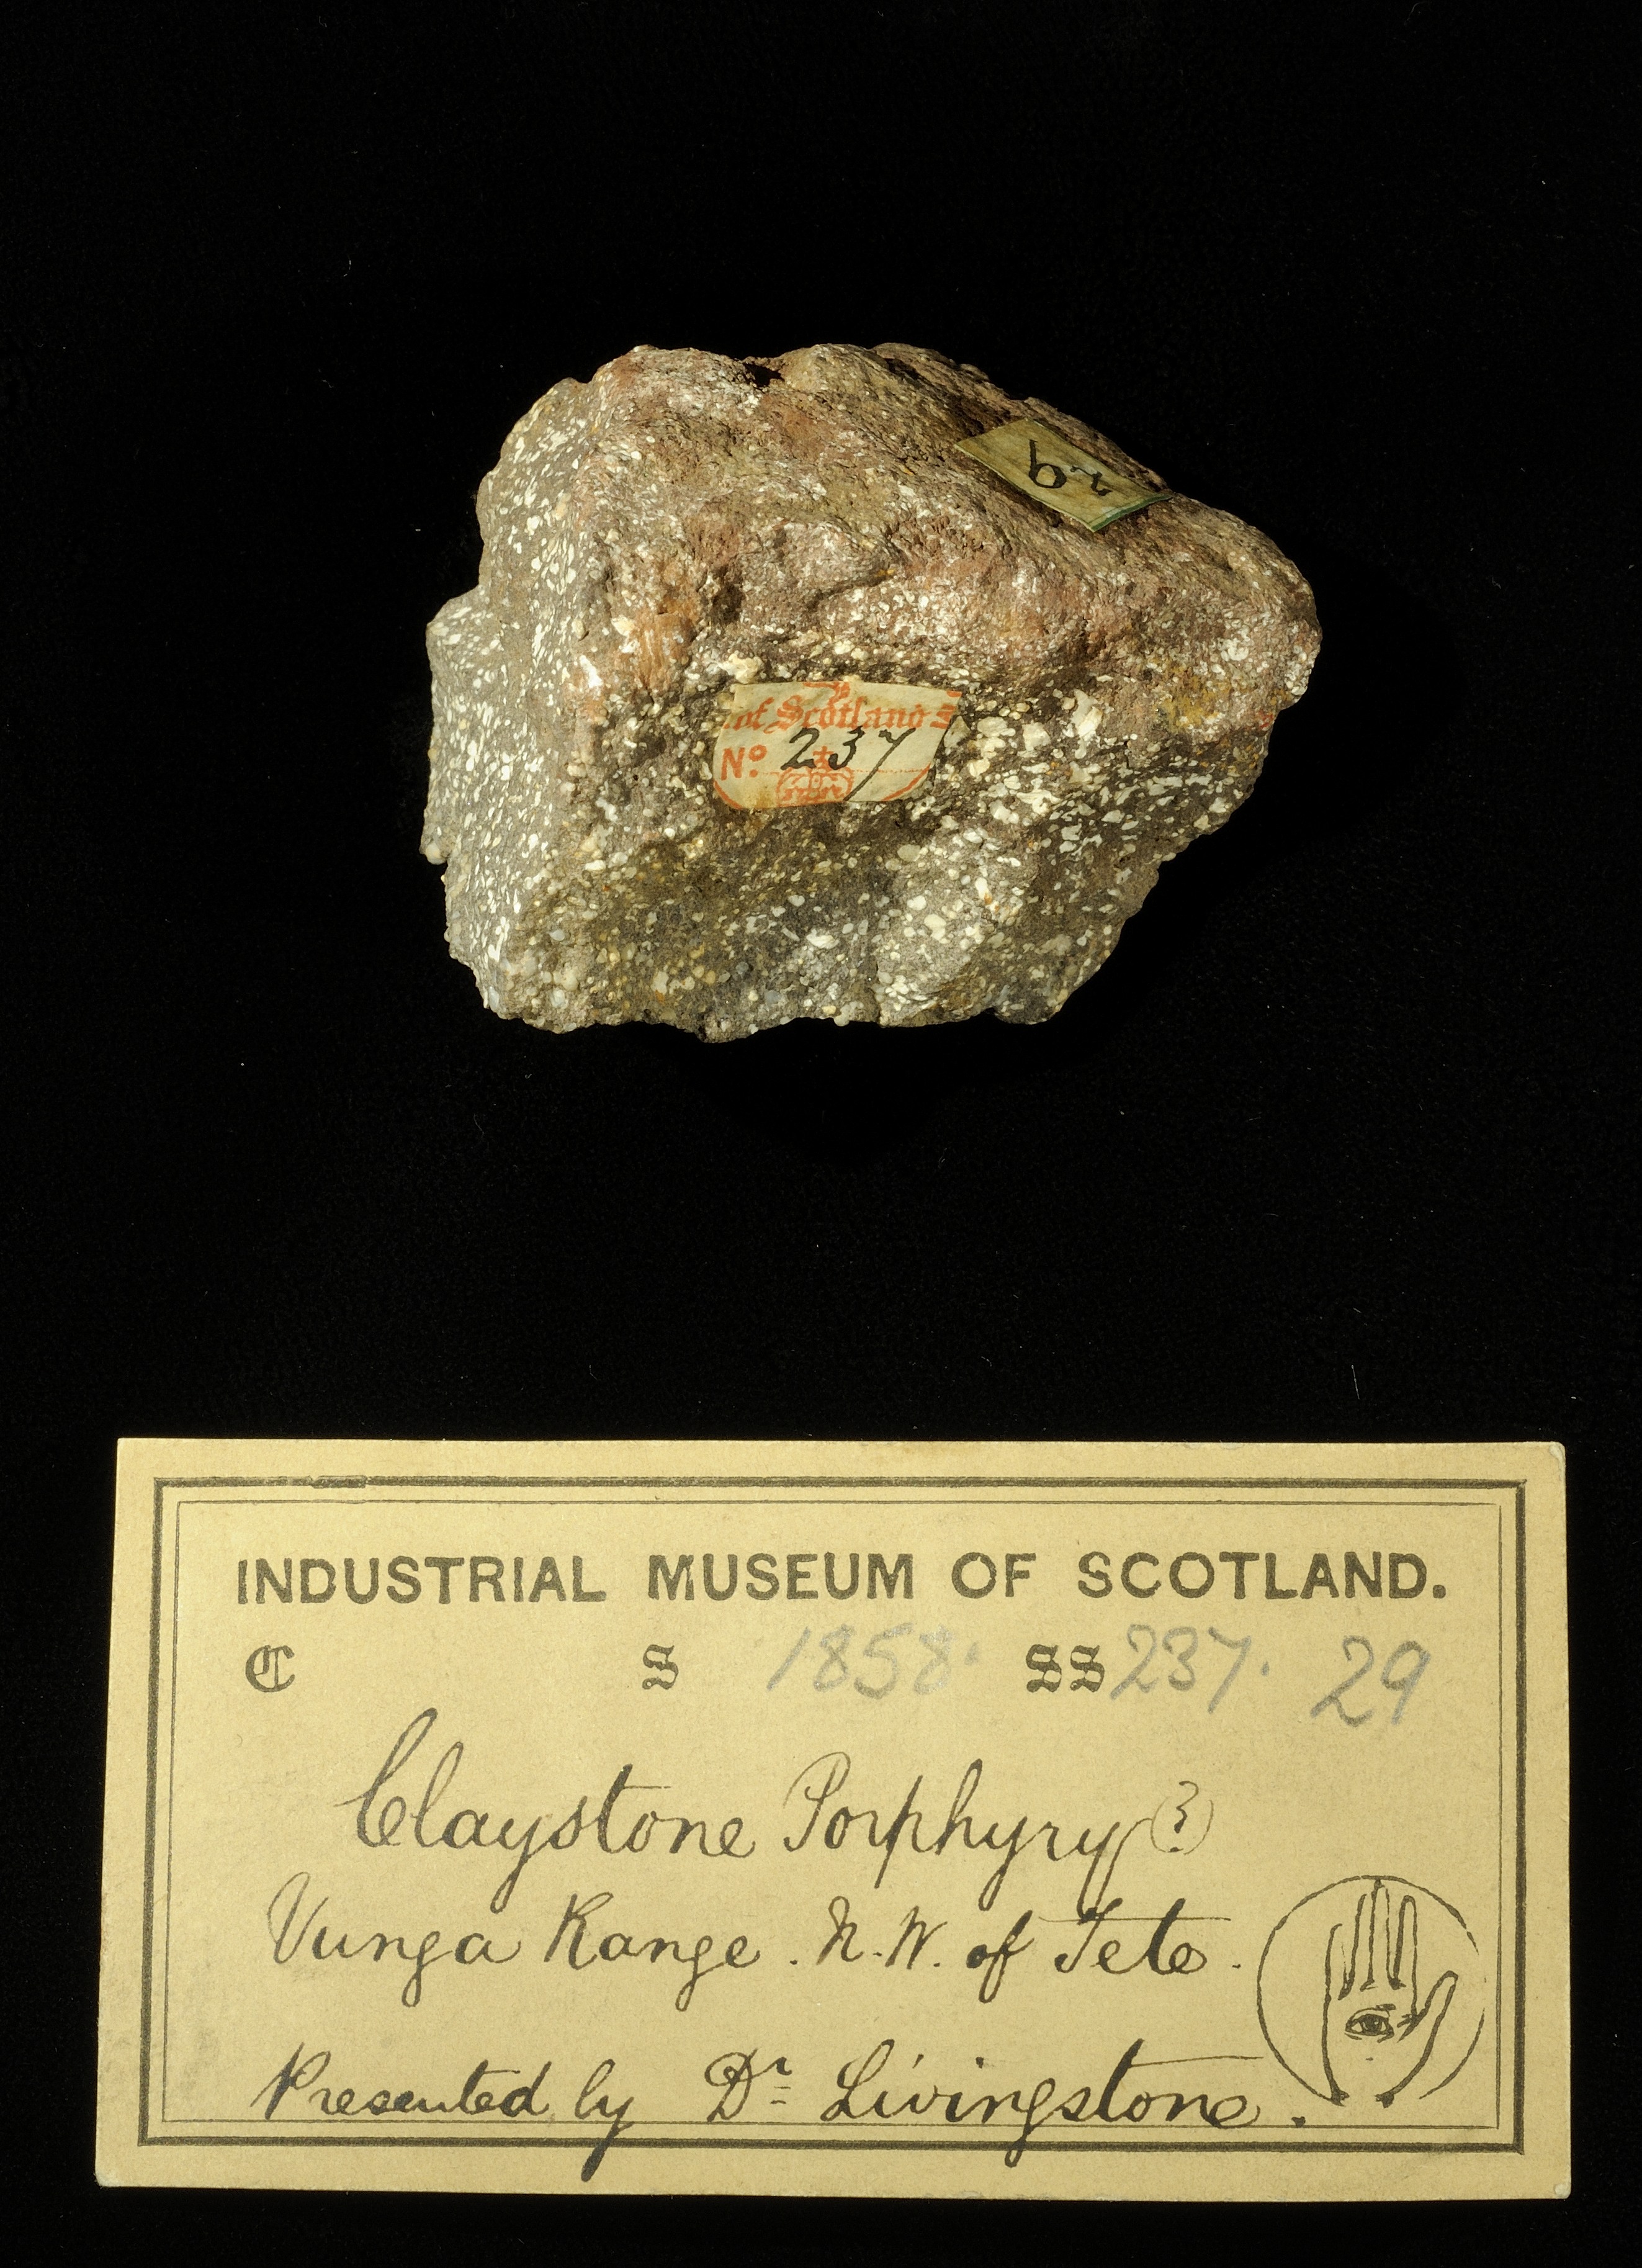 Specimen of clay-stone porphyry with 19th century museum label: ‘Claystone porphyry (?) Vunga Range. NW of Tete. Presented by Dr Livingstone.’